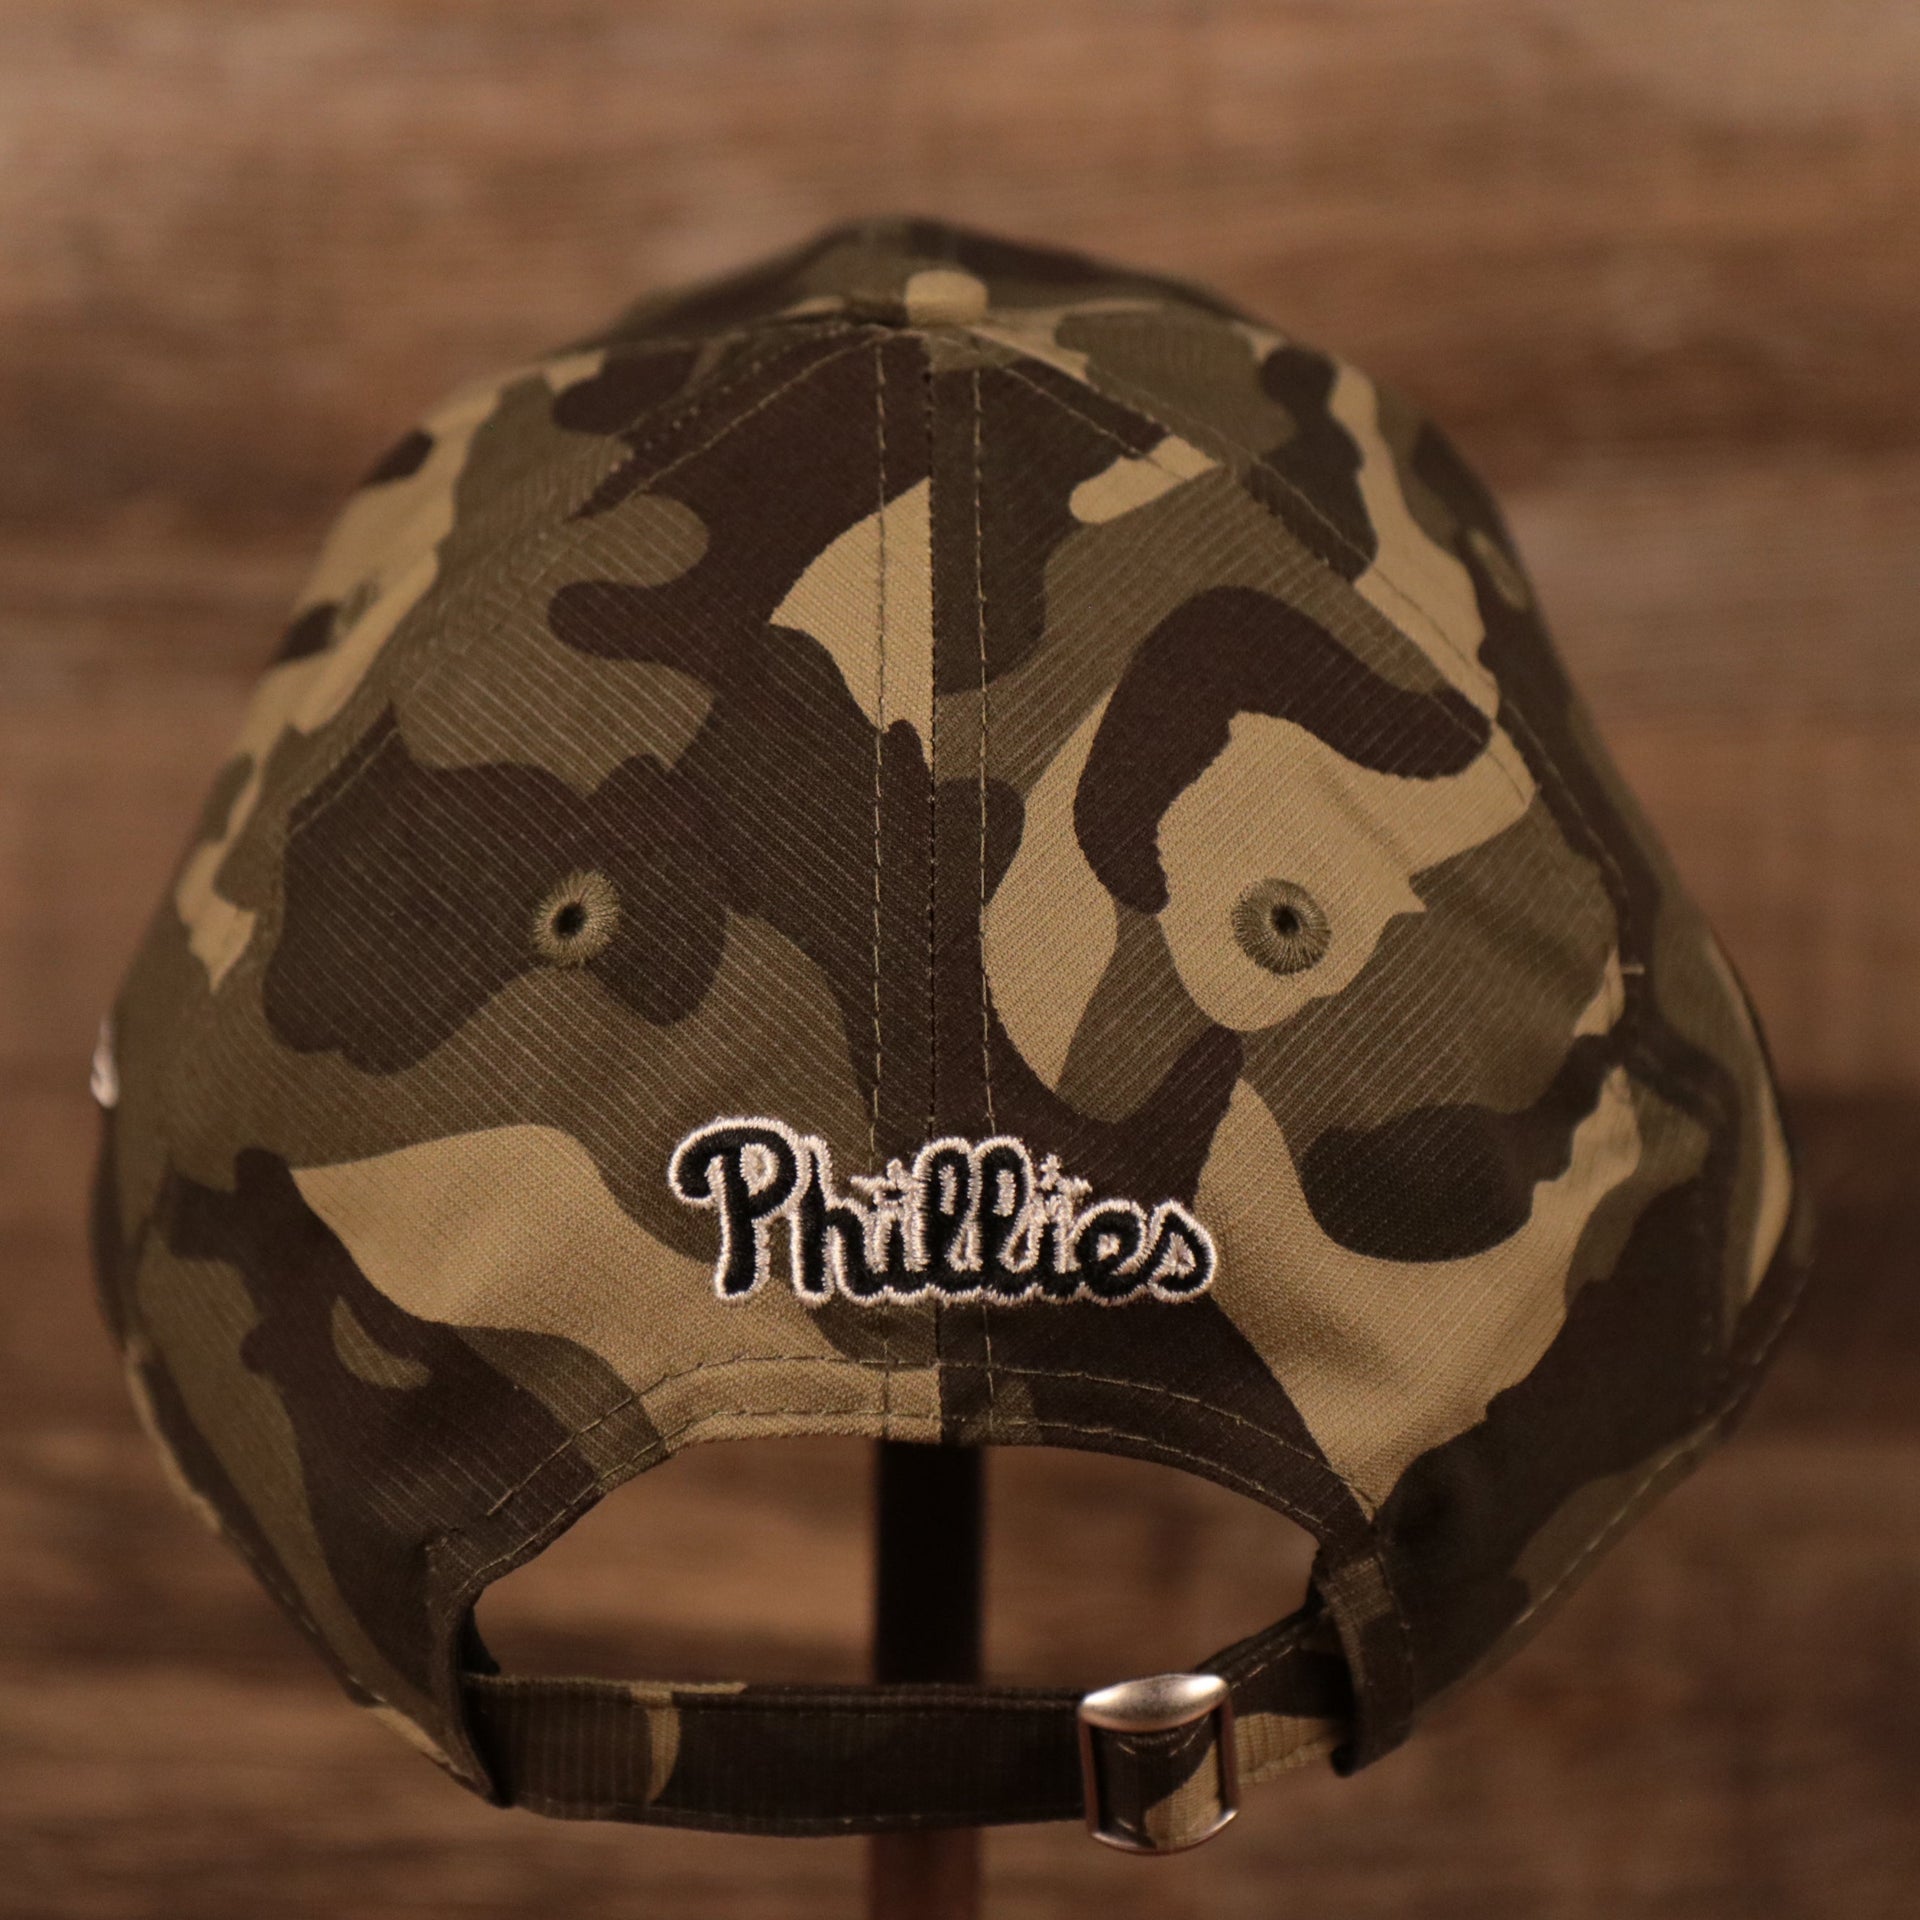 The backside of the Philadelphia Phillies Memorial Day dad hat 2021 has an adjustable strap.